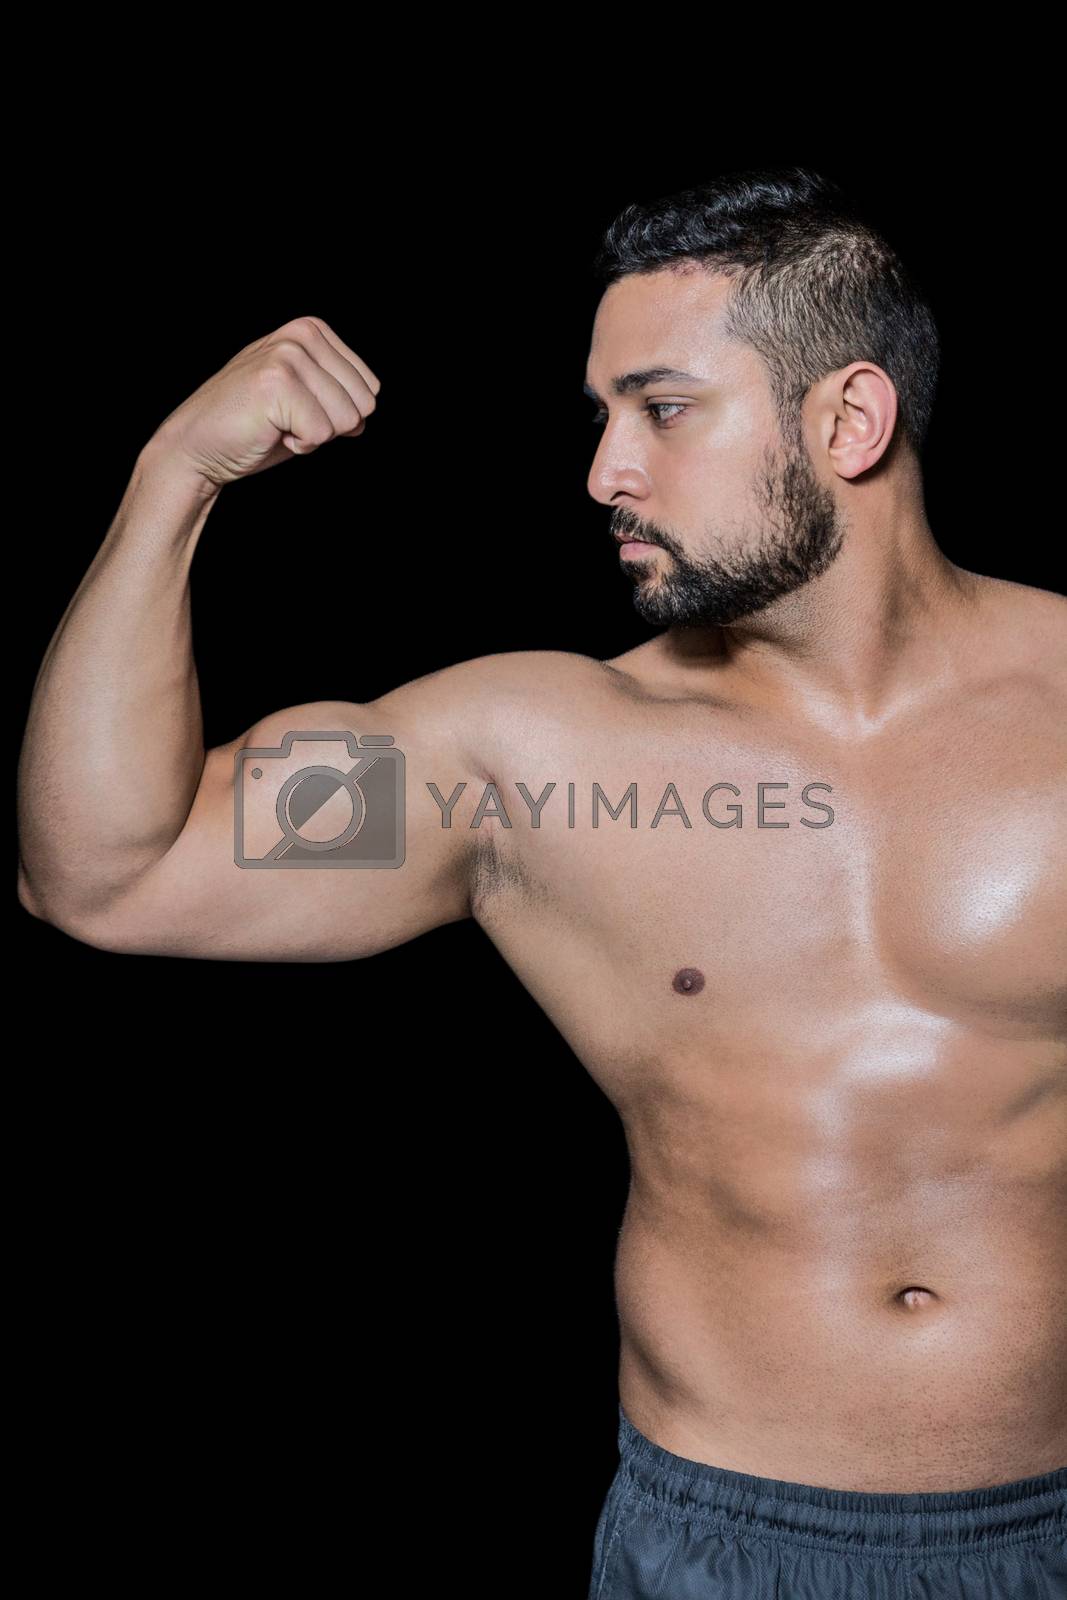 Royalty free image of Bodybuilder man flexing his muscles by Wavebreakmedia